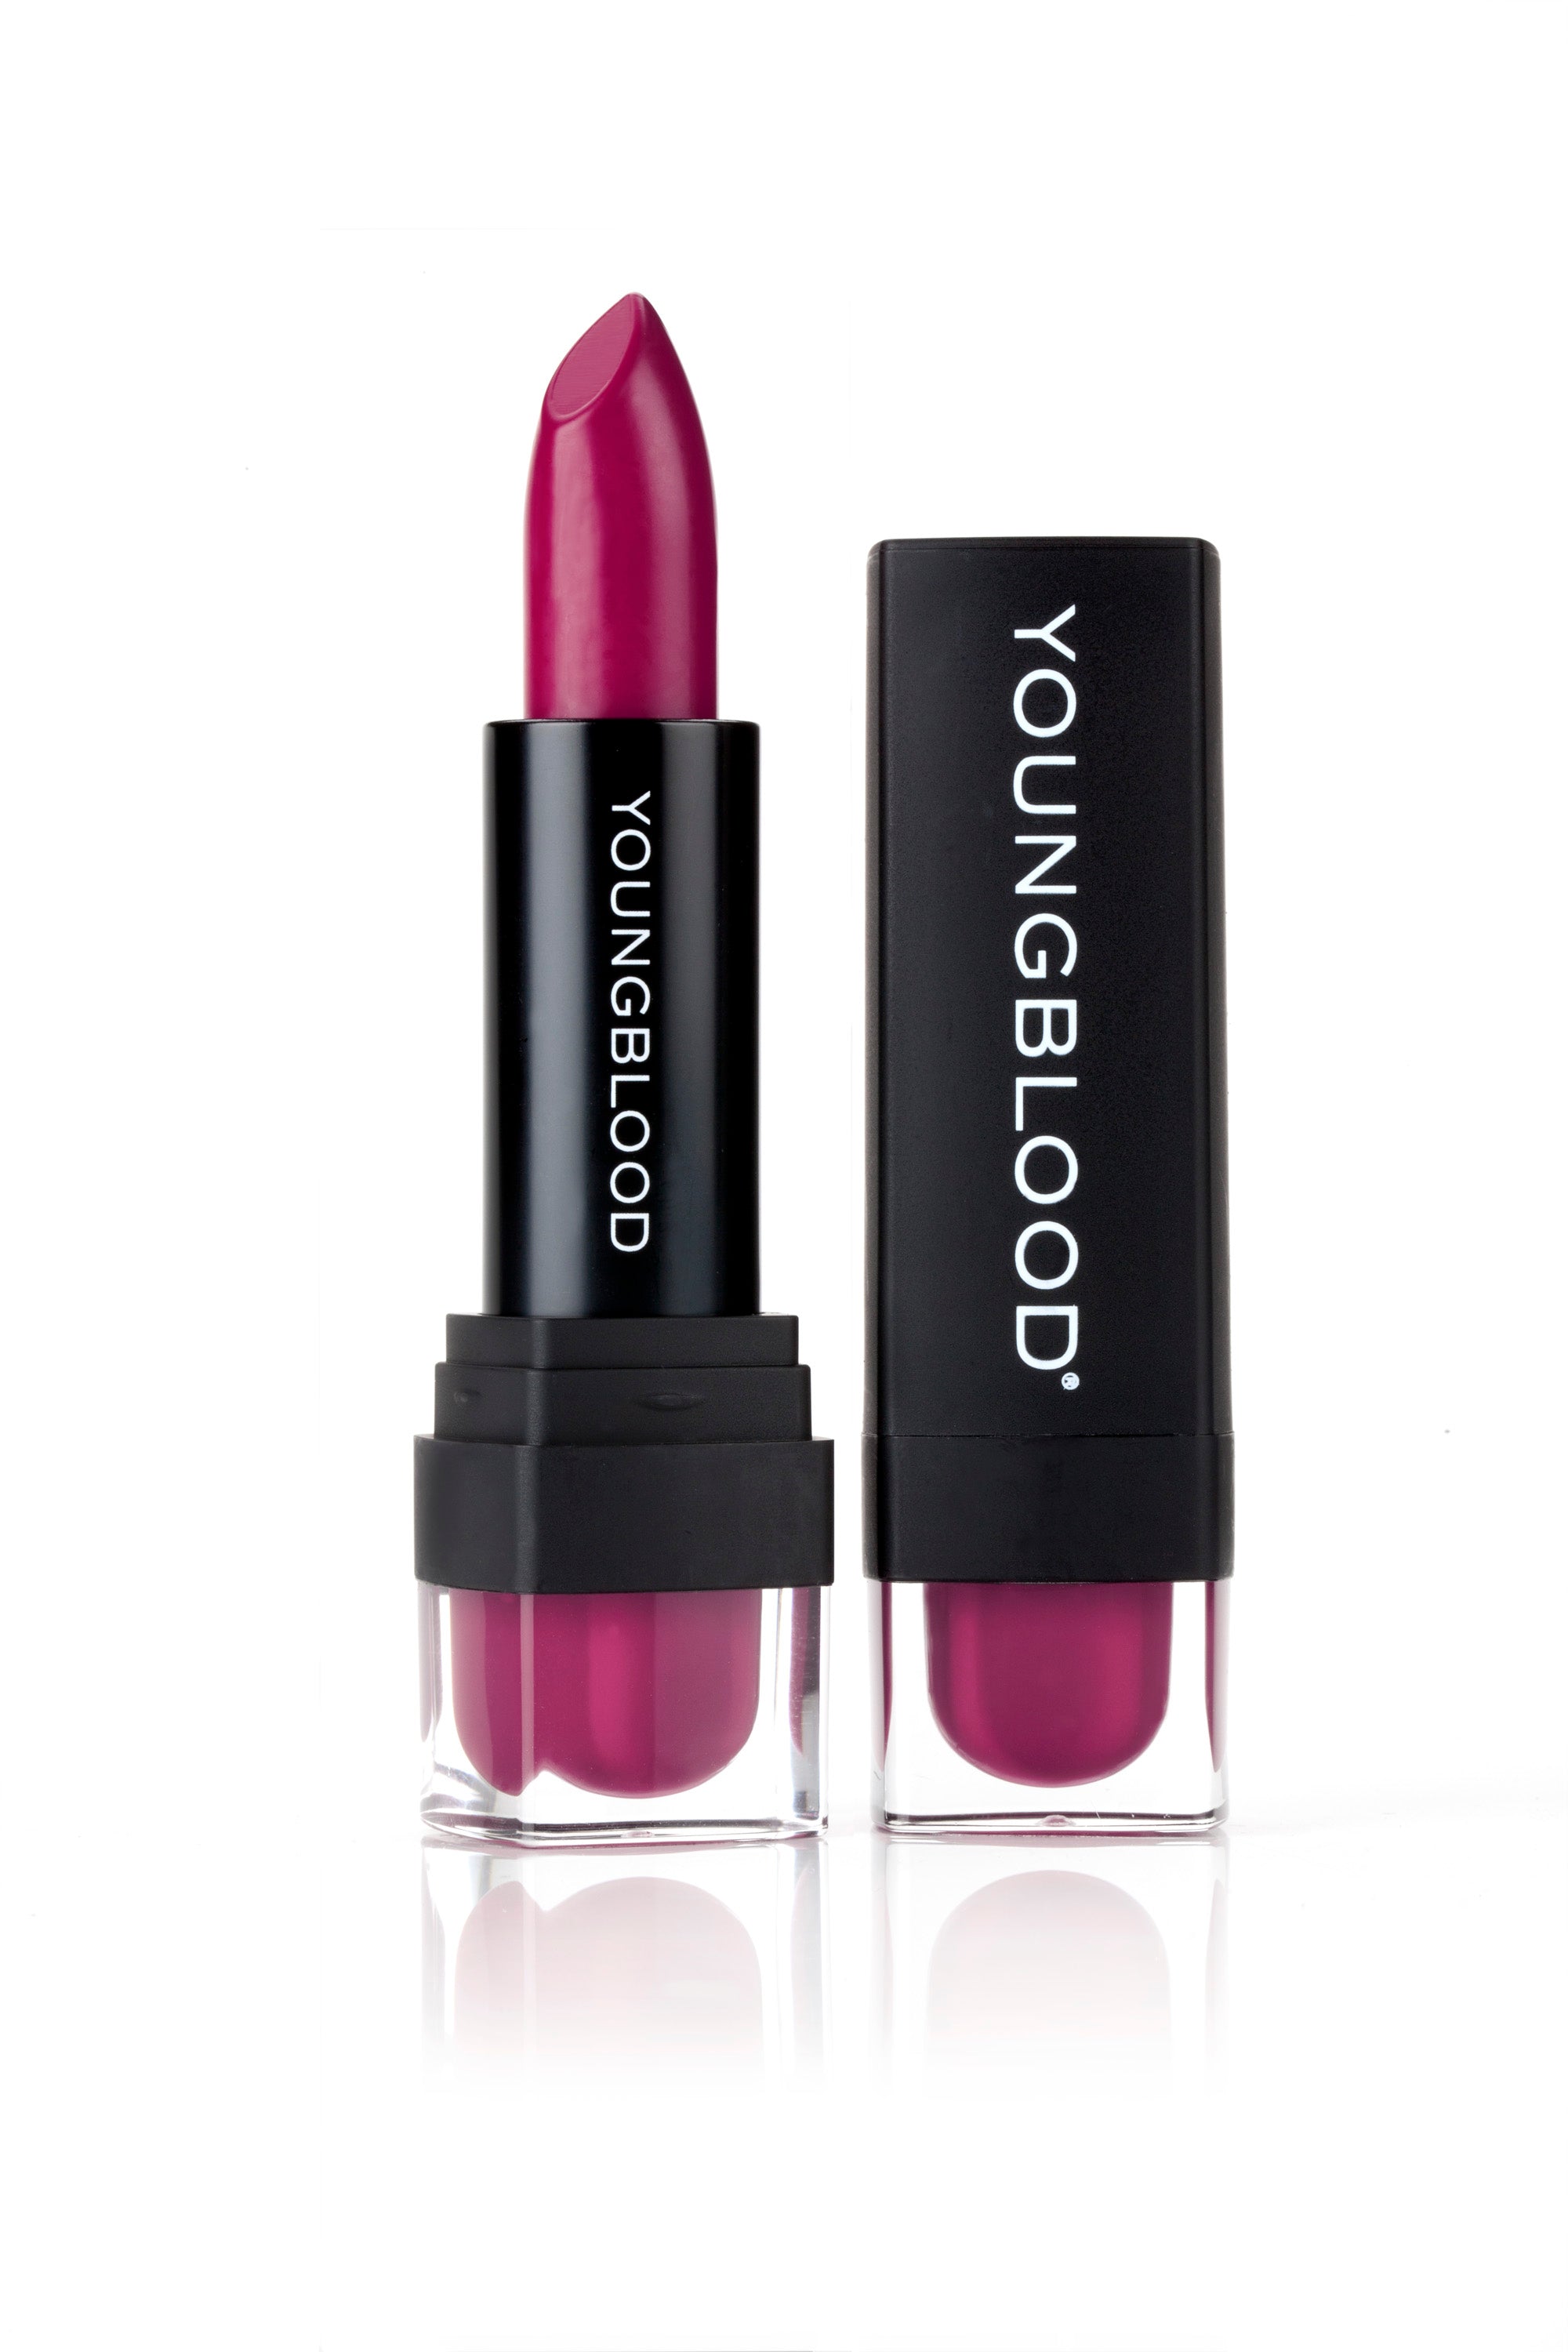 Youngblood Mineral Cosmetics Mineral Creme Lipstick